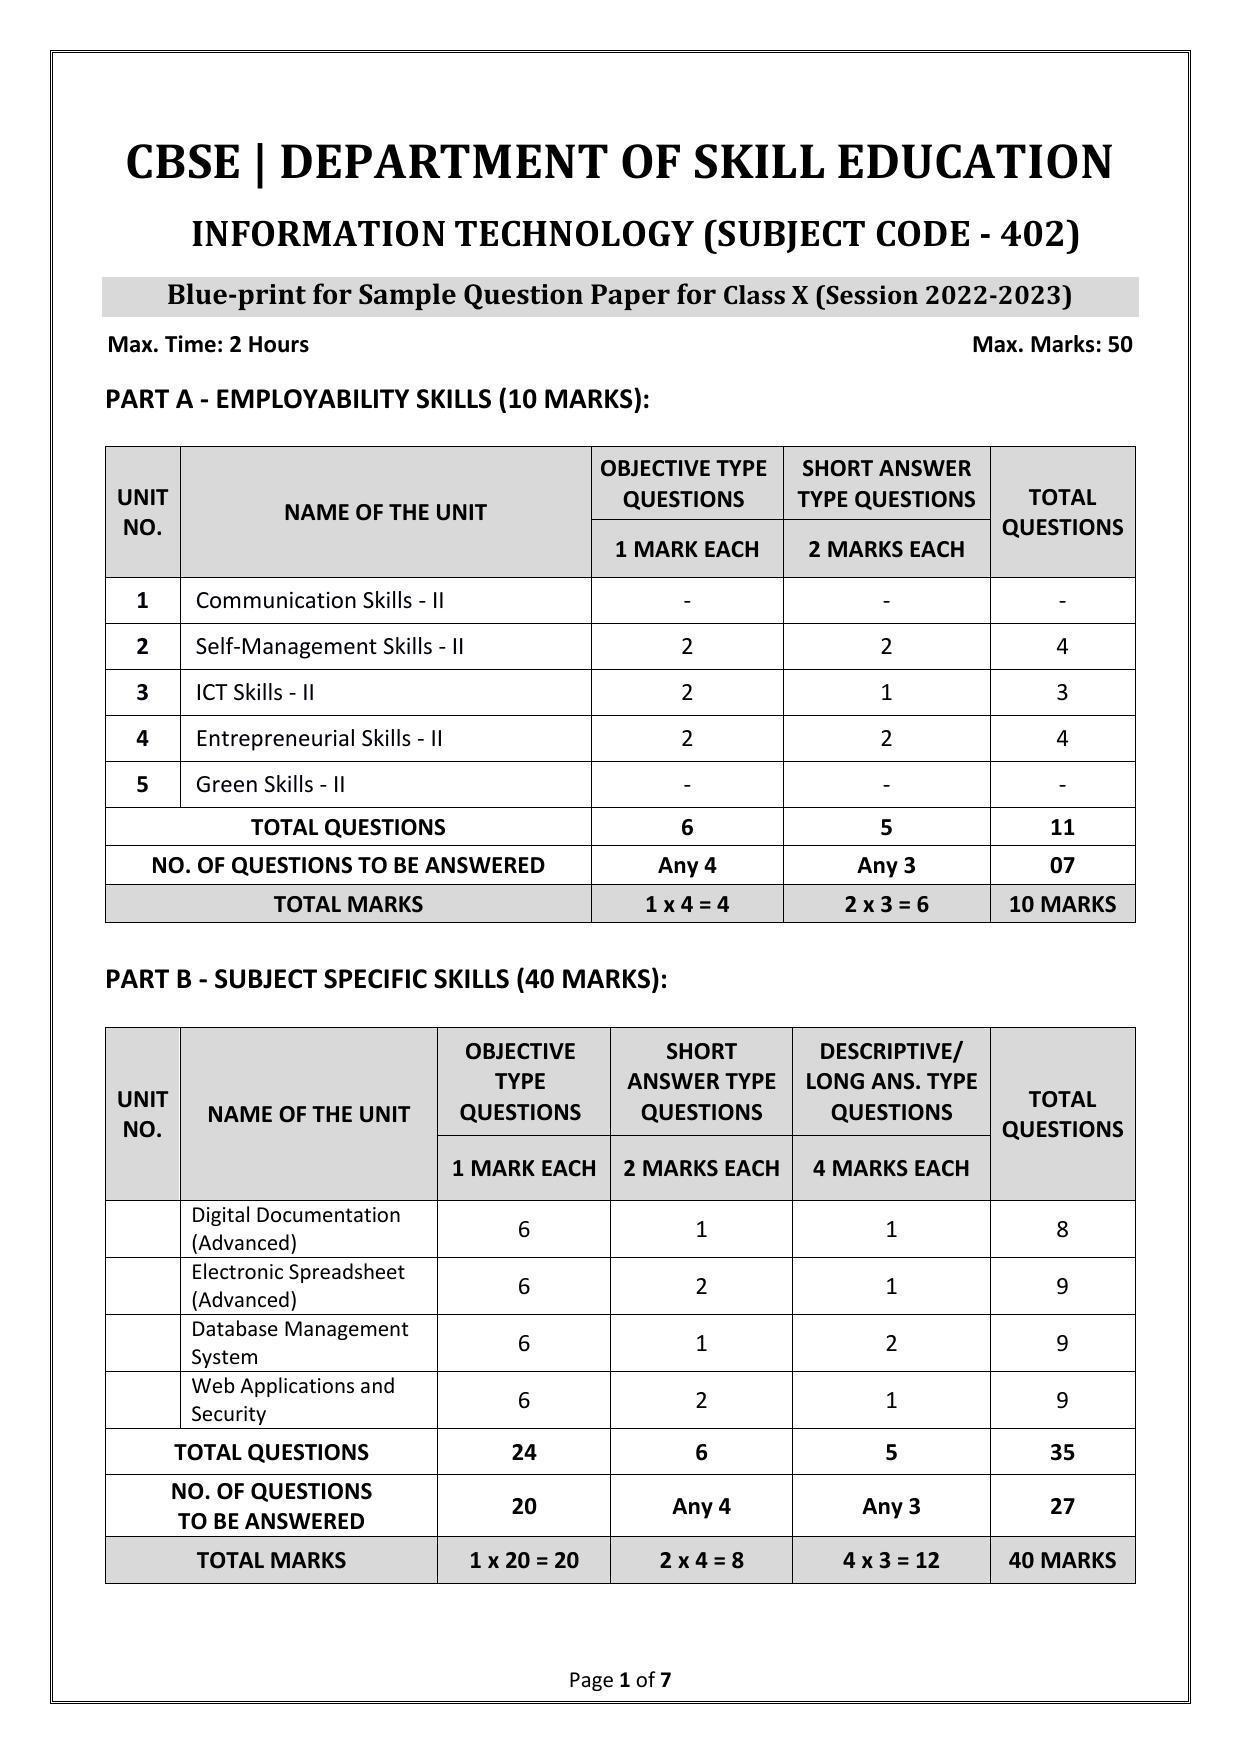 CBSE Class 10 (Skill Education) Information Technology Sample Papers 2023 - Page 1